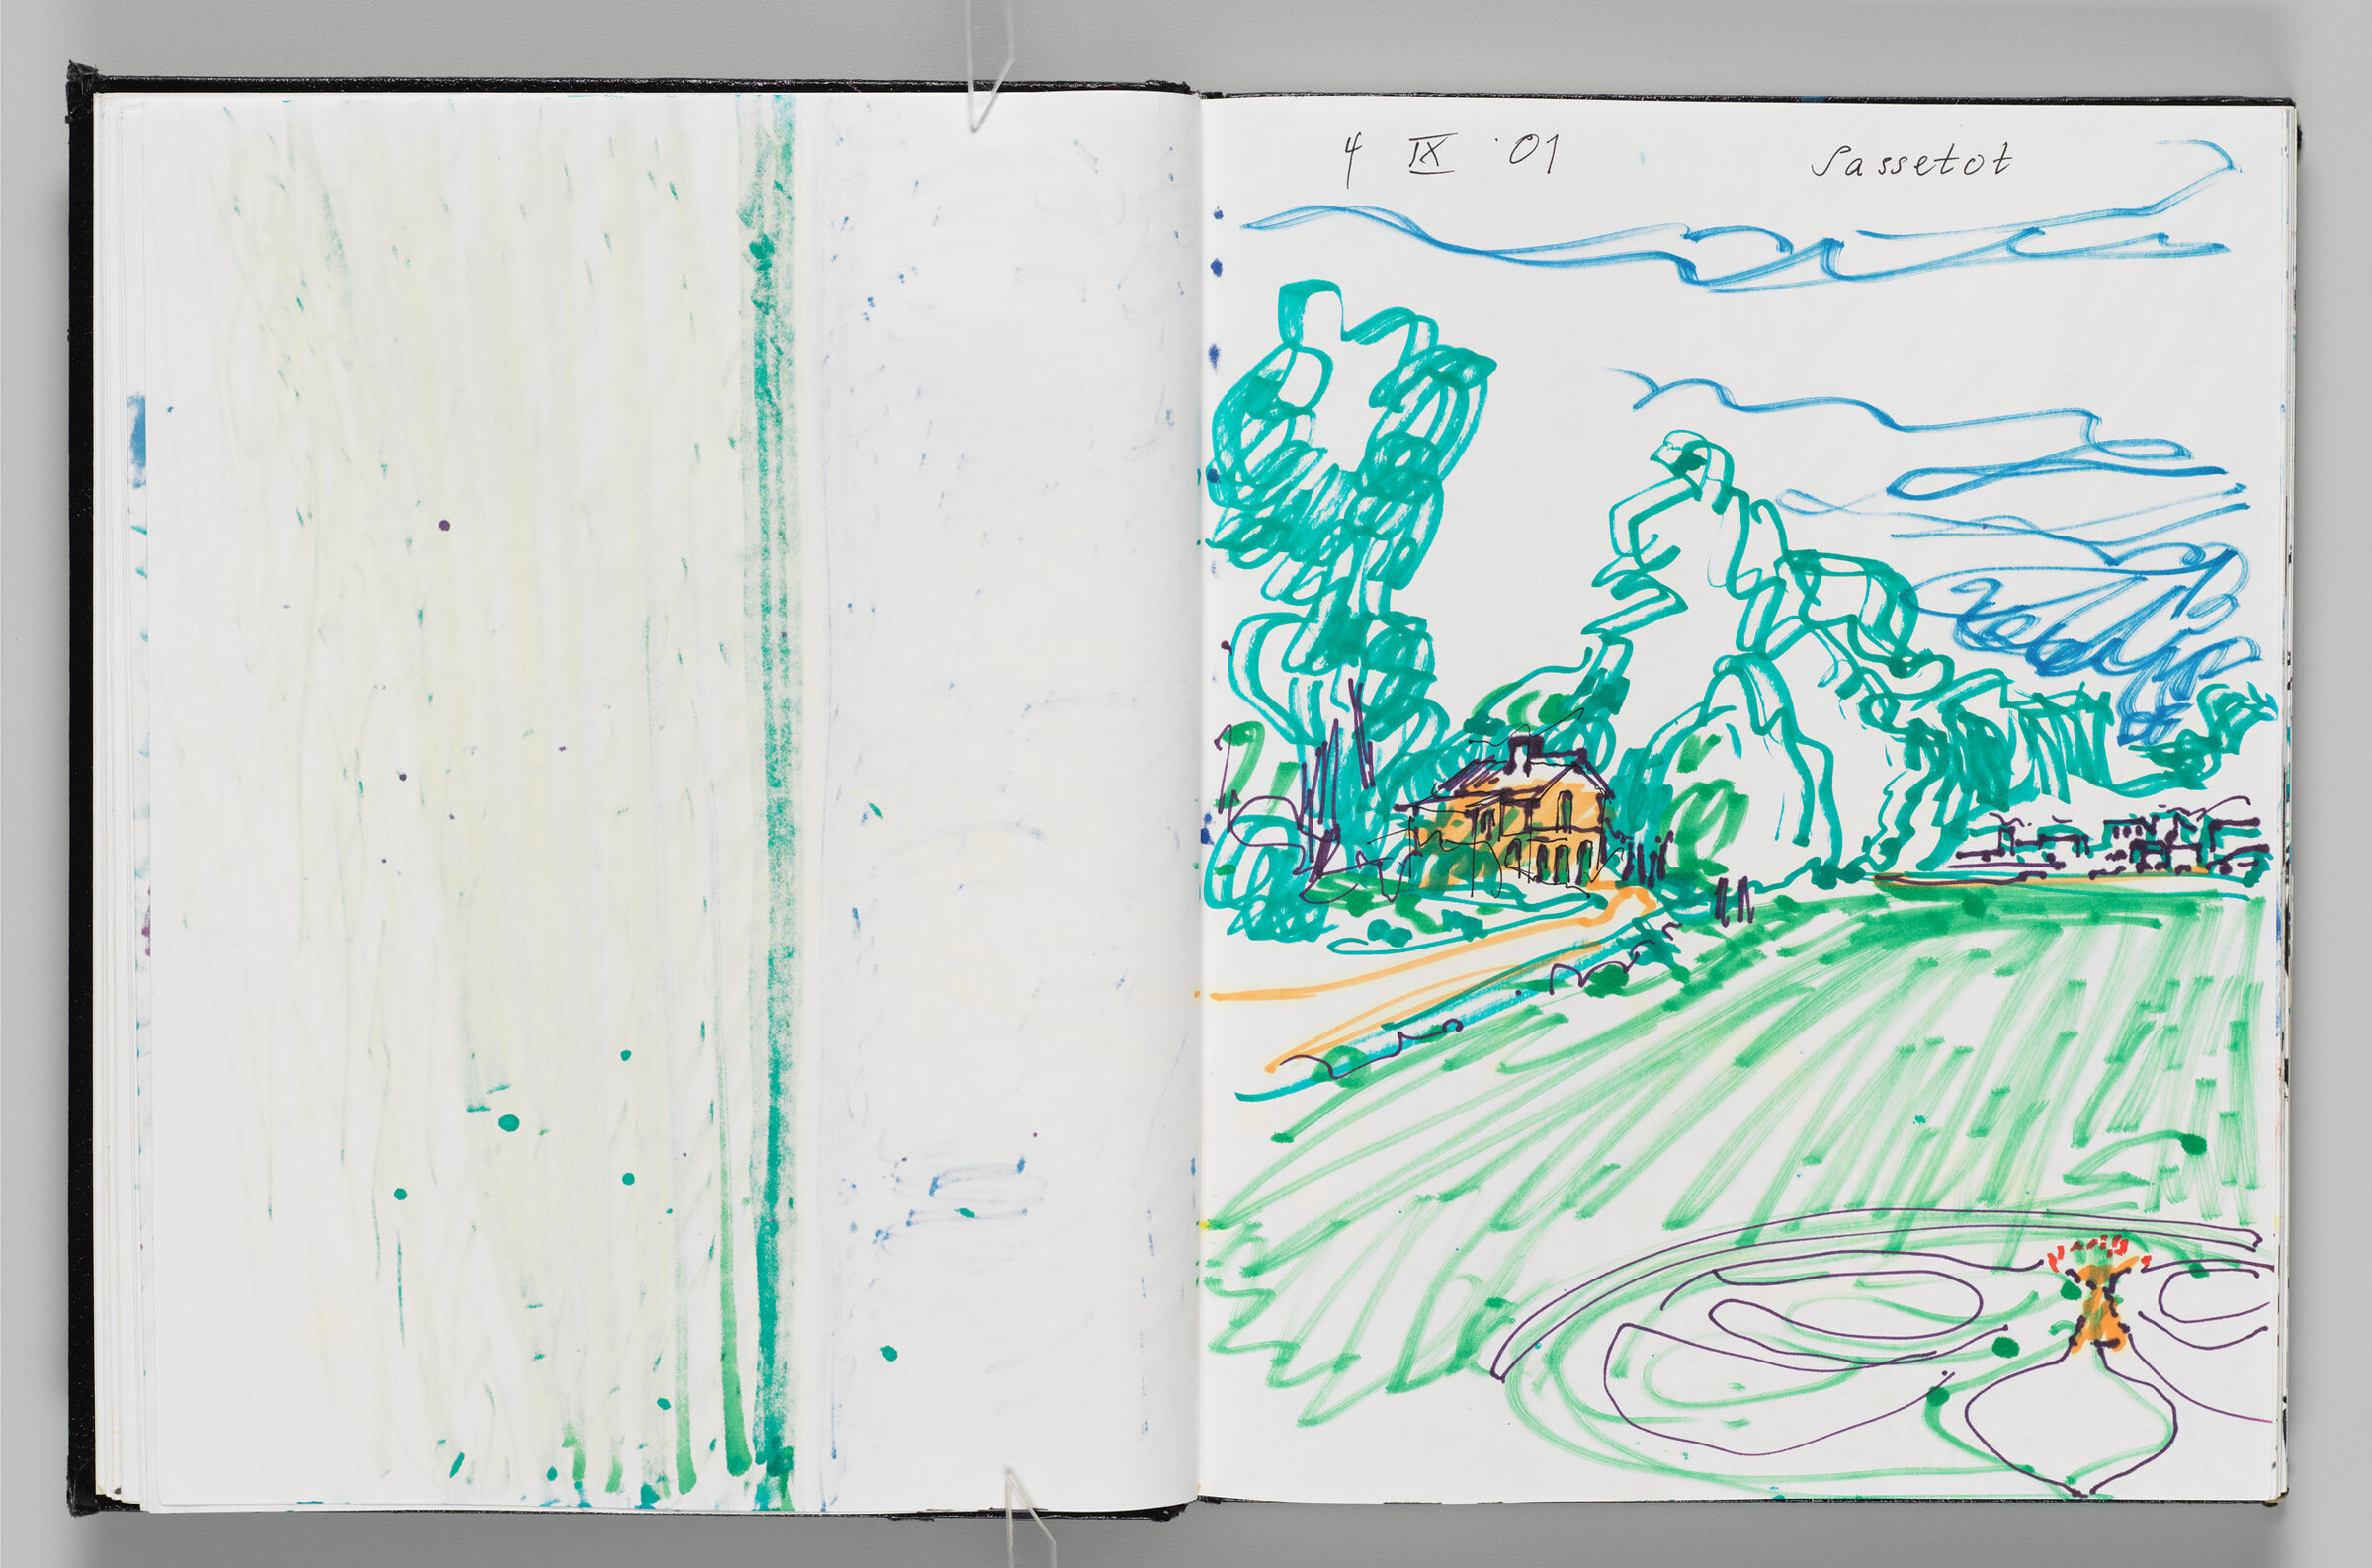 Untitled (Bleed-Through Of Previous Page, Left Page); Untitled (Garden And Chateau In Sassetot, France, Right Page)